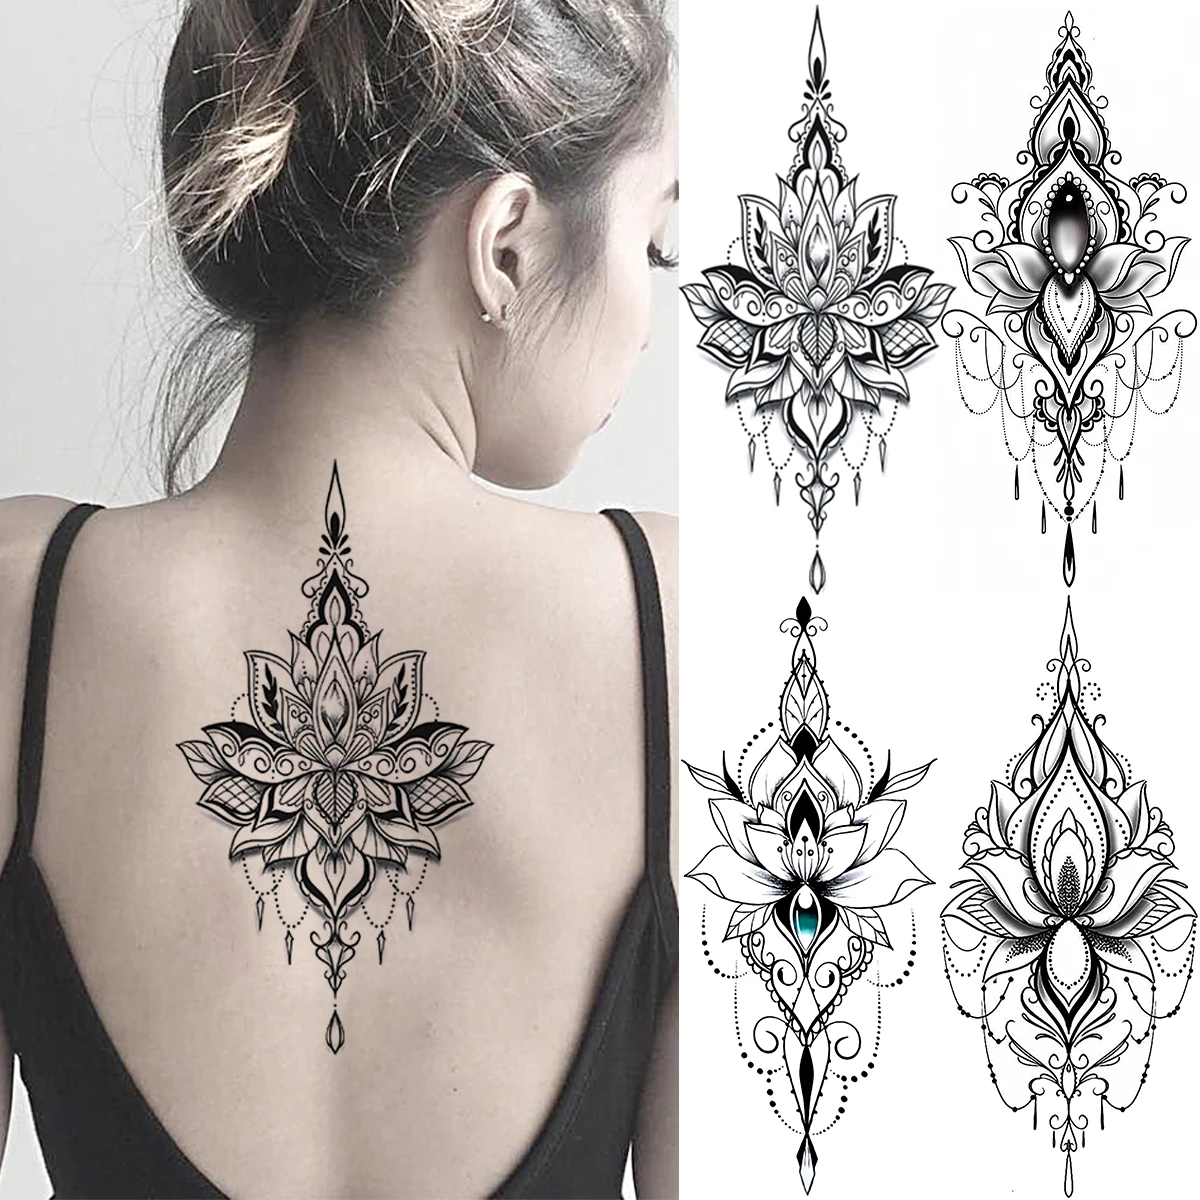 Bergbeklimmer Silicium Edelsteen Sexy Henna Lotus Pendant Back Temporary Tattoos For Women Adult Jewelry  Fake Tattoos Realistic Body Art Decoration Tatoos Paper|Temporary Tattoos|  - AliExpress